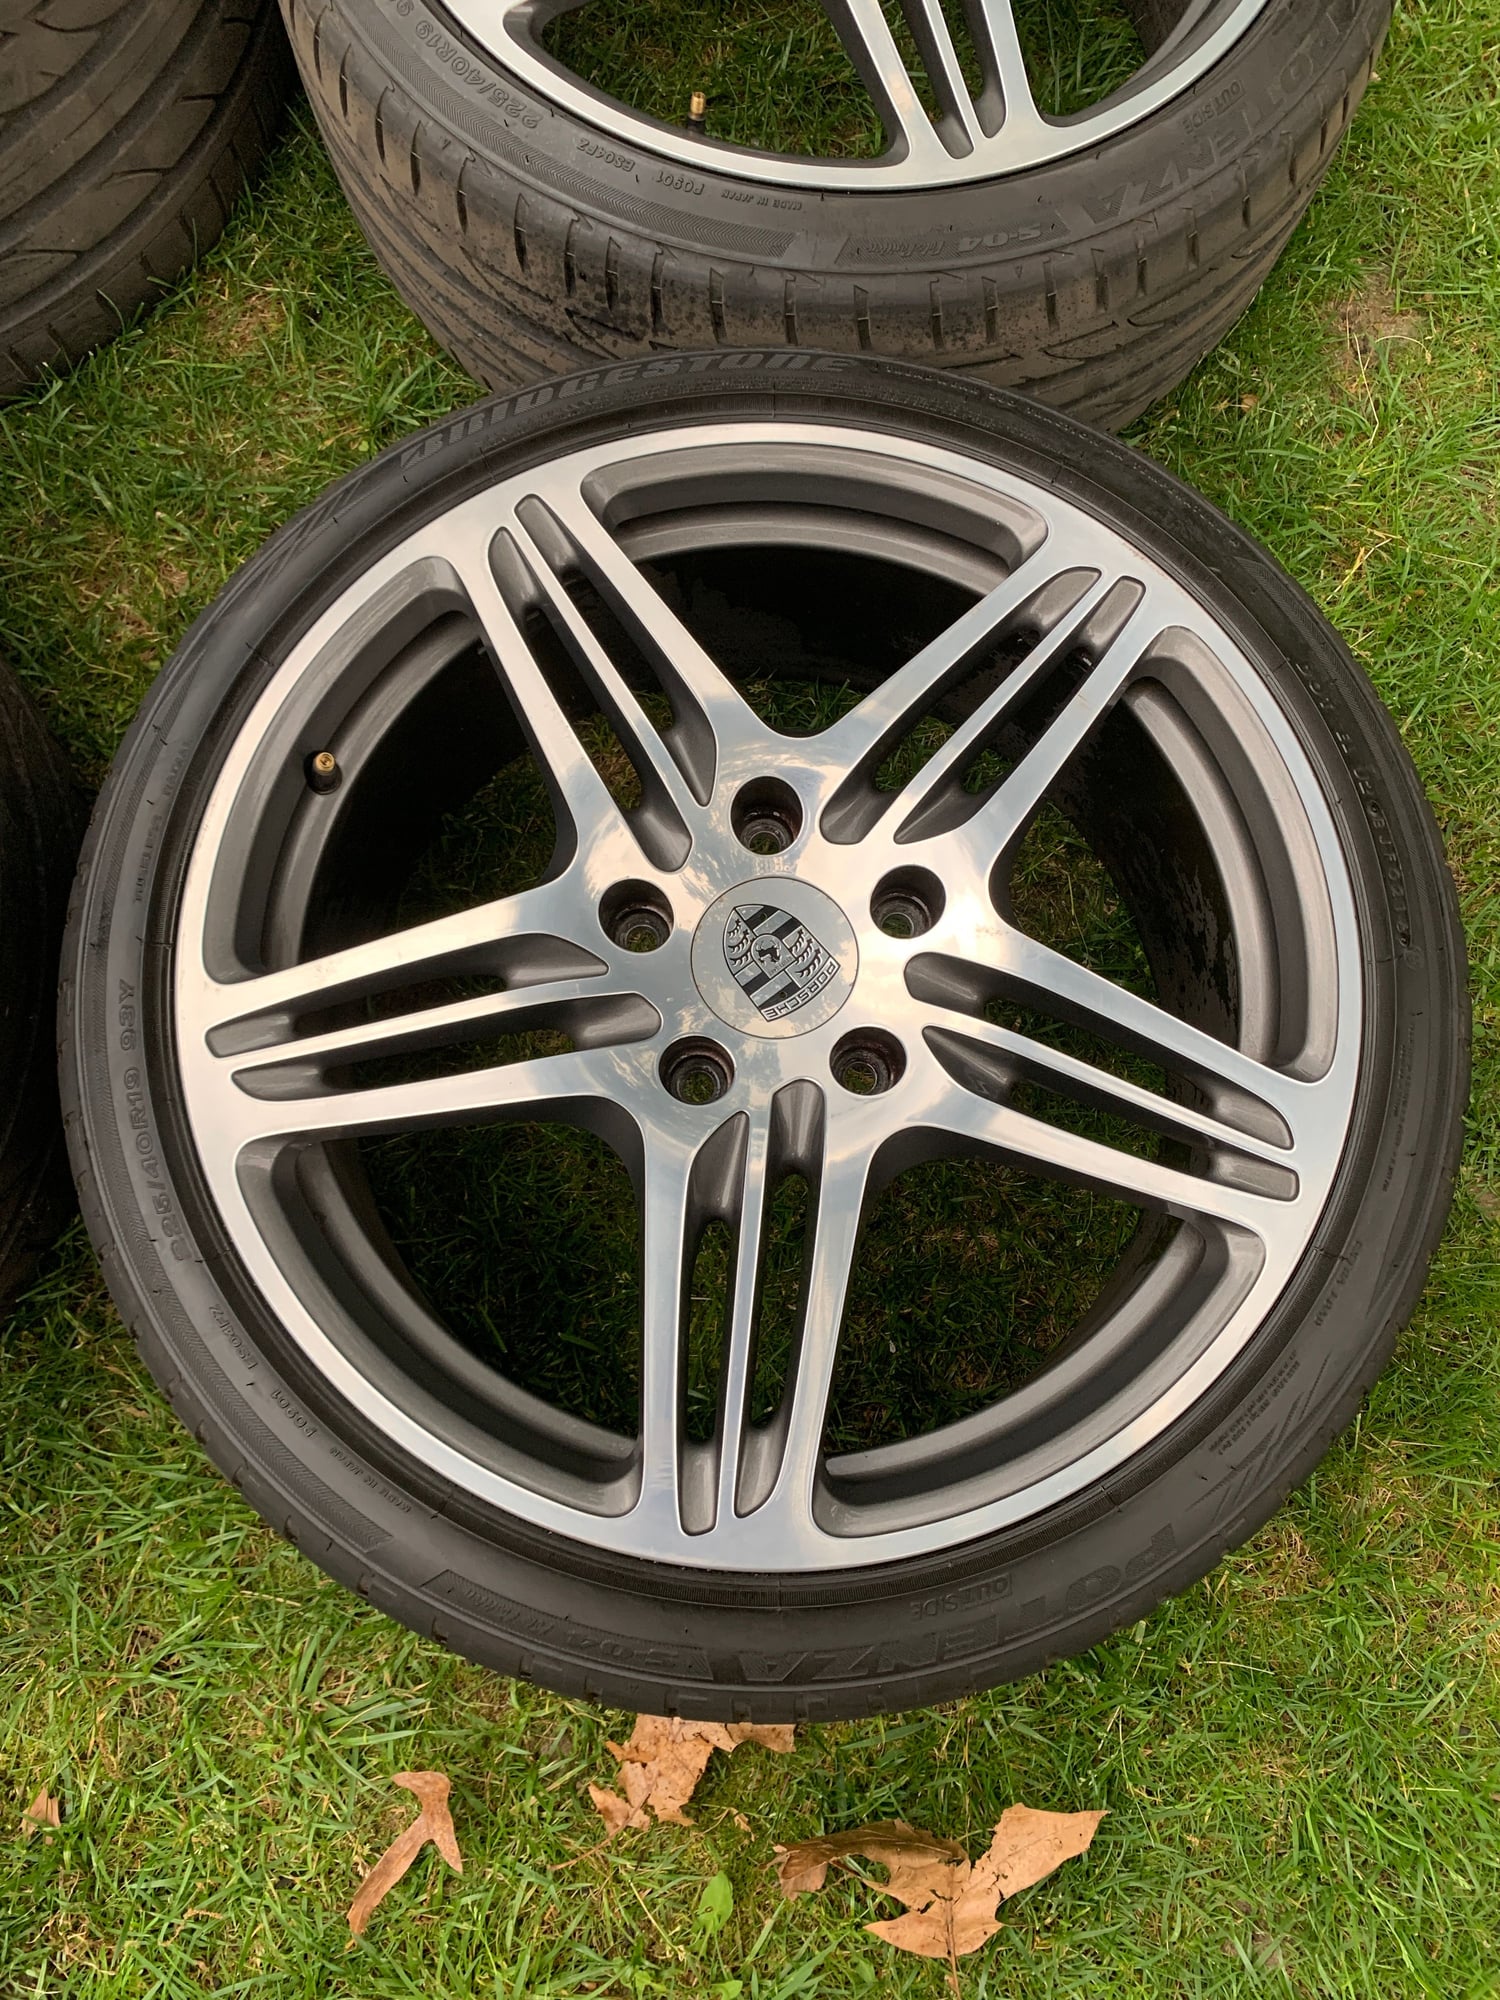 Wheels and Tires/Axles - OEM 997 Turbo rims and Potenza S-04 tires - Used - 2001 to 2011 Porsche 911 - Sewell, NJ 08080, United States